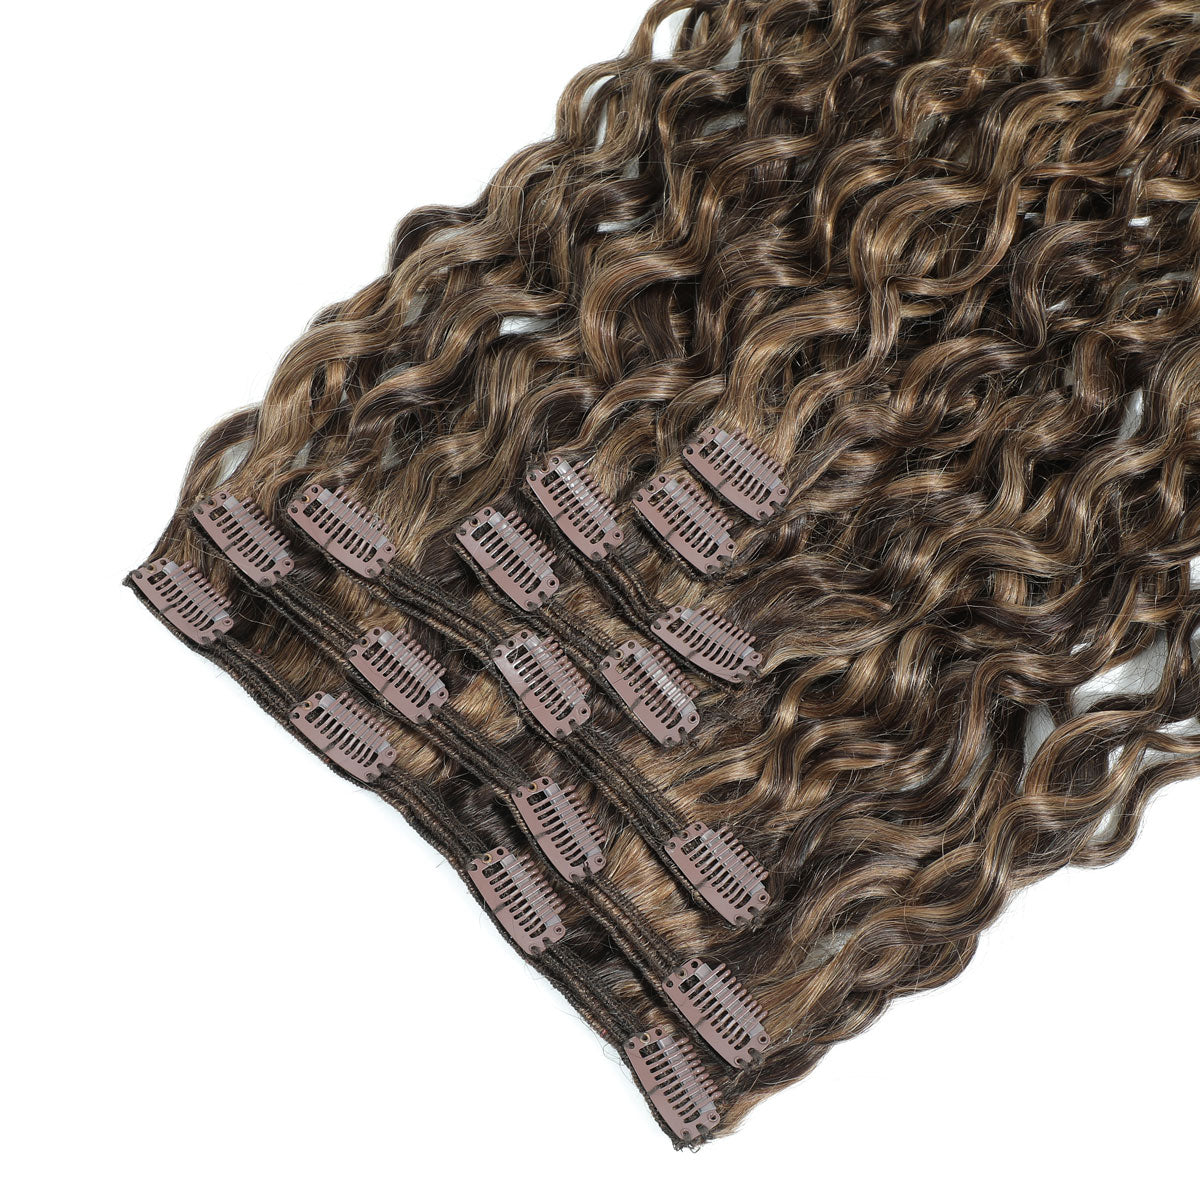 Curly Clip In Hair Extensions 3b #2/10 Dark Brown and Caramel